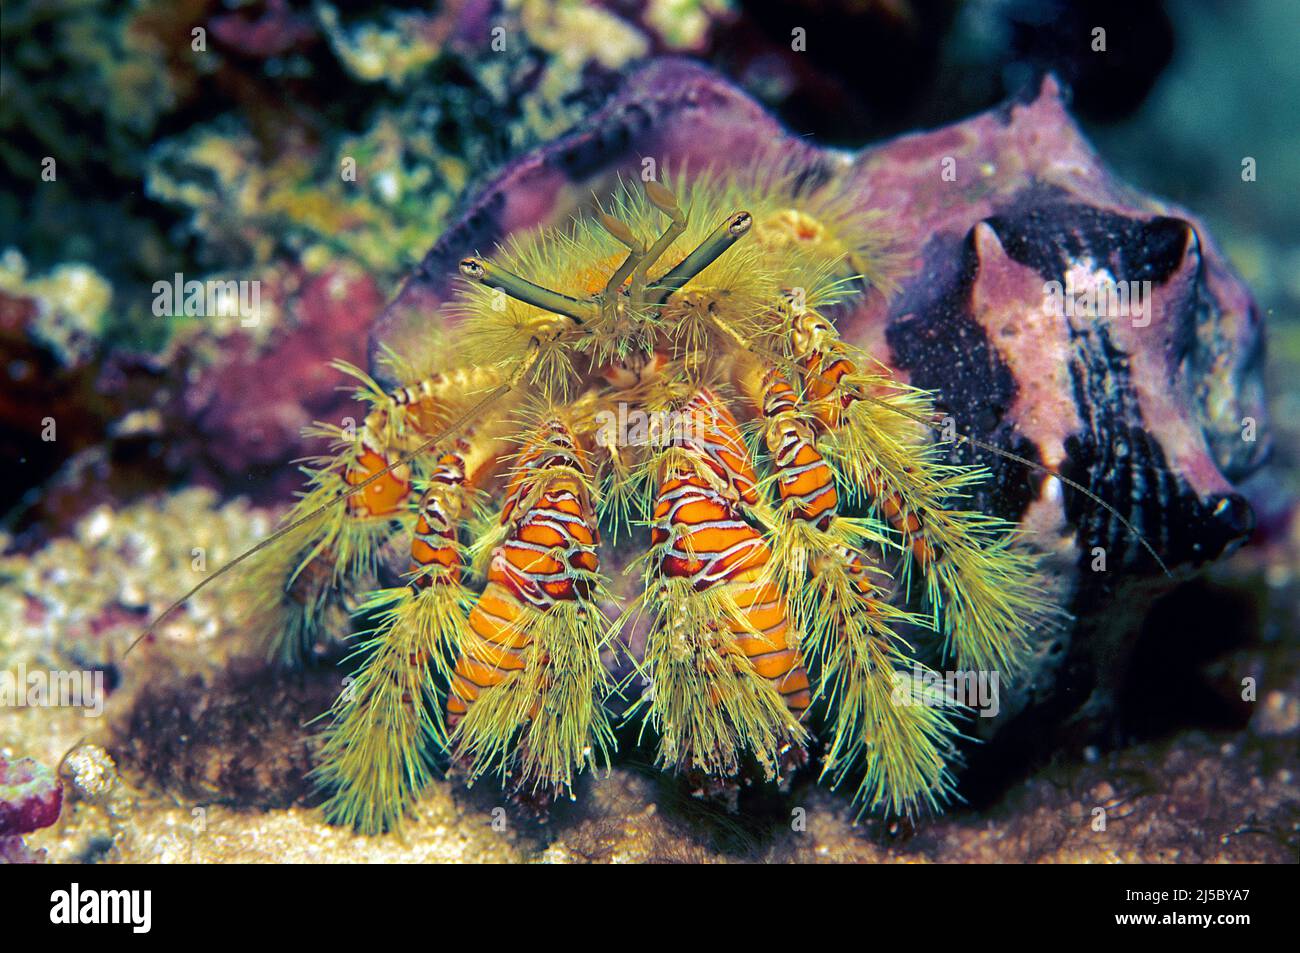 Hairy Orange Hermit Crab or Hairy Yellow Hermit Crab (Aniculus maximus) at night in a coral reef, Maldives, Indian Ocean, Asia Stock Photo